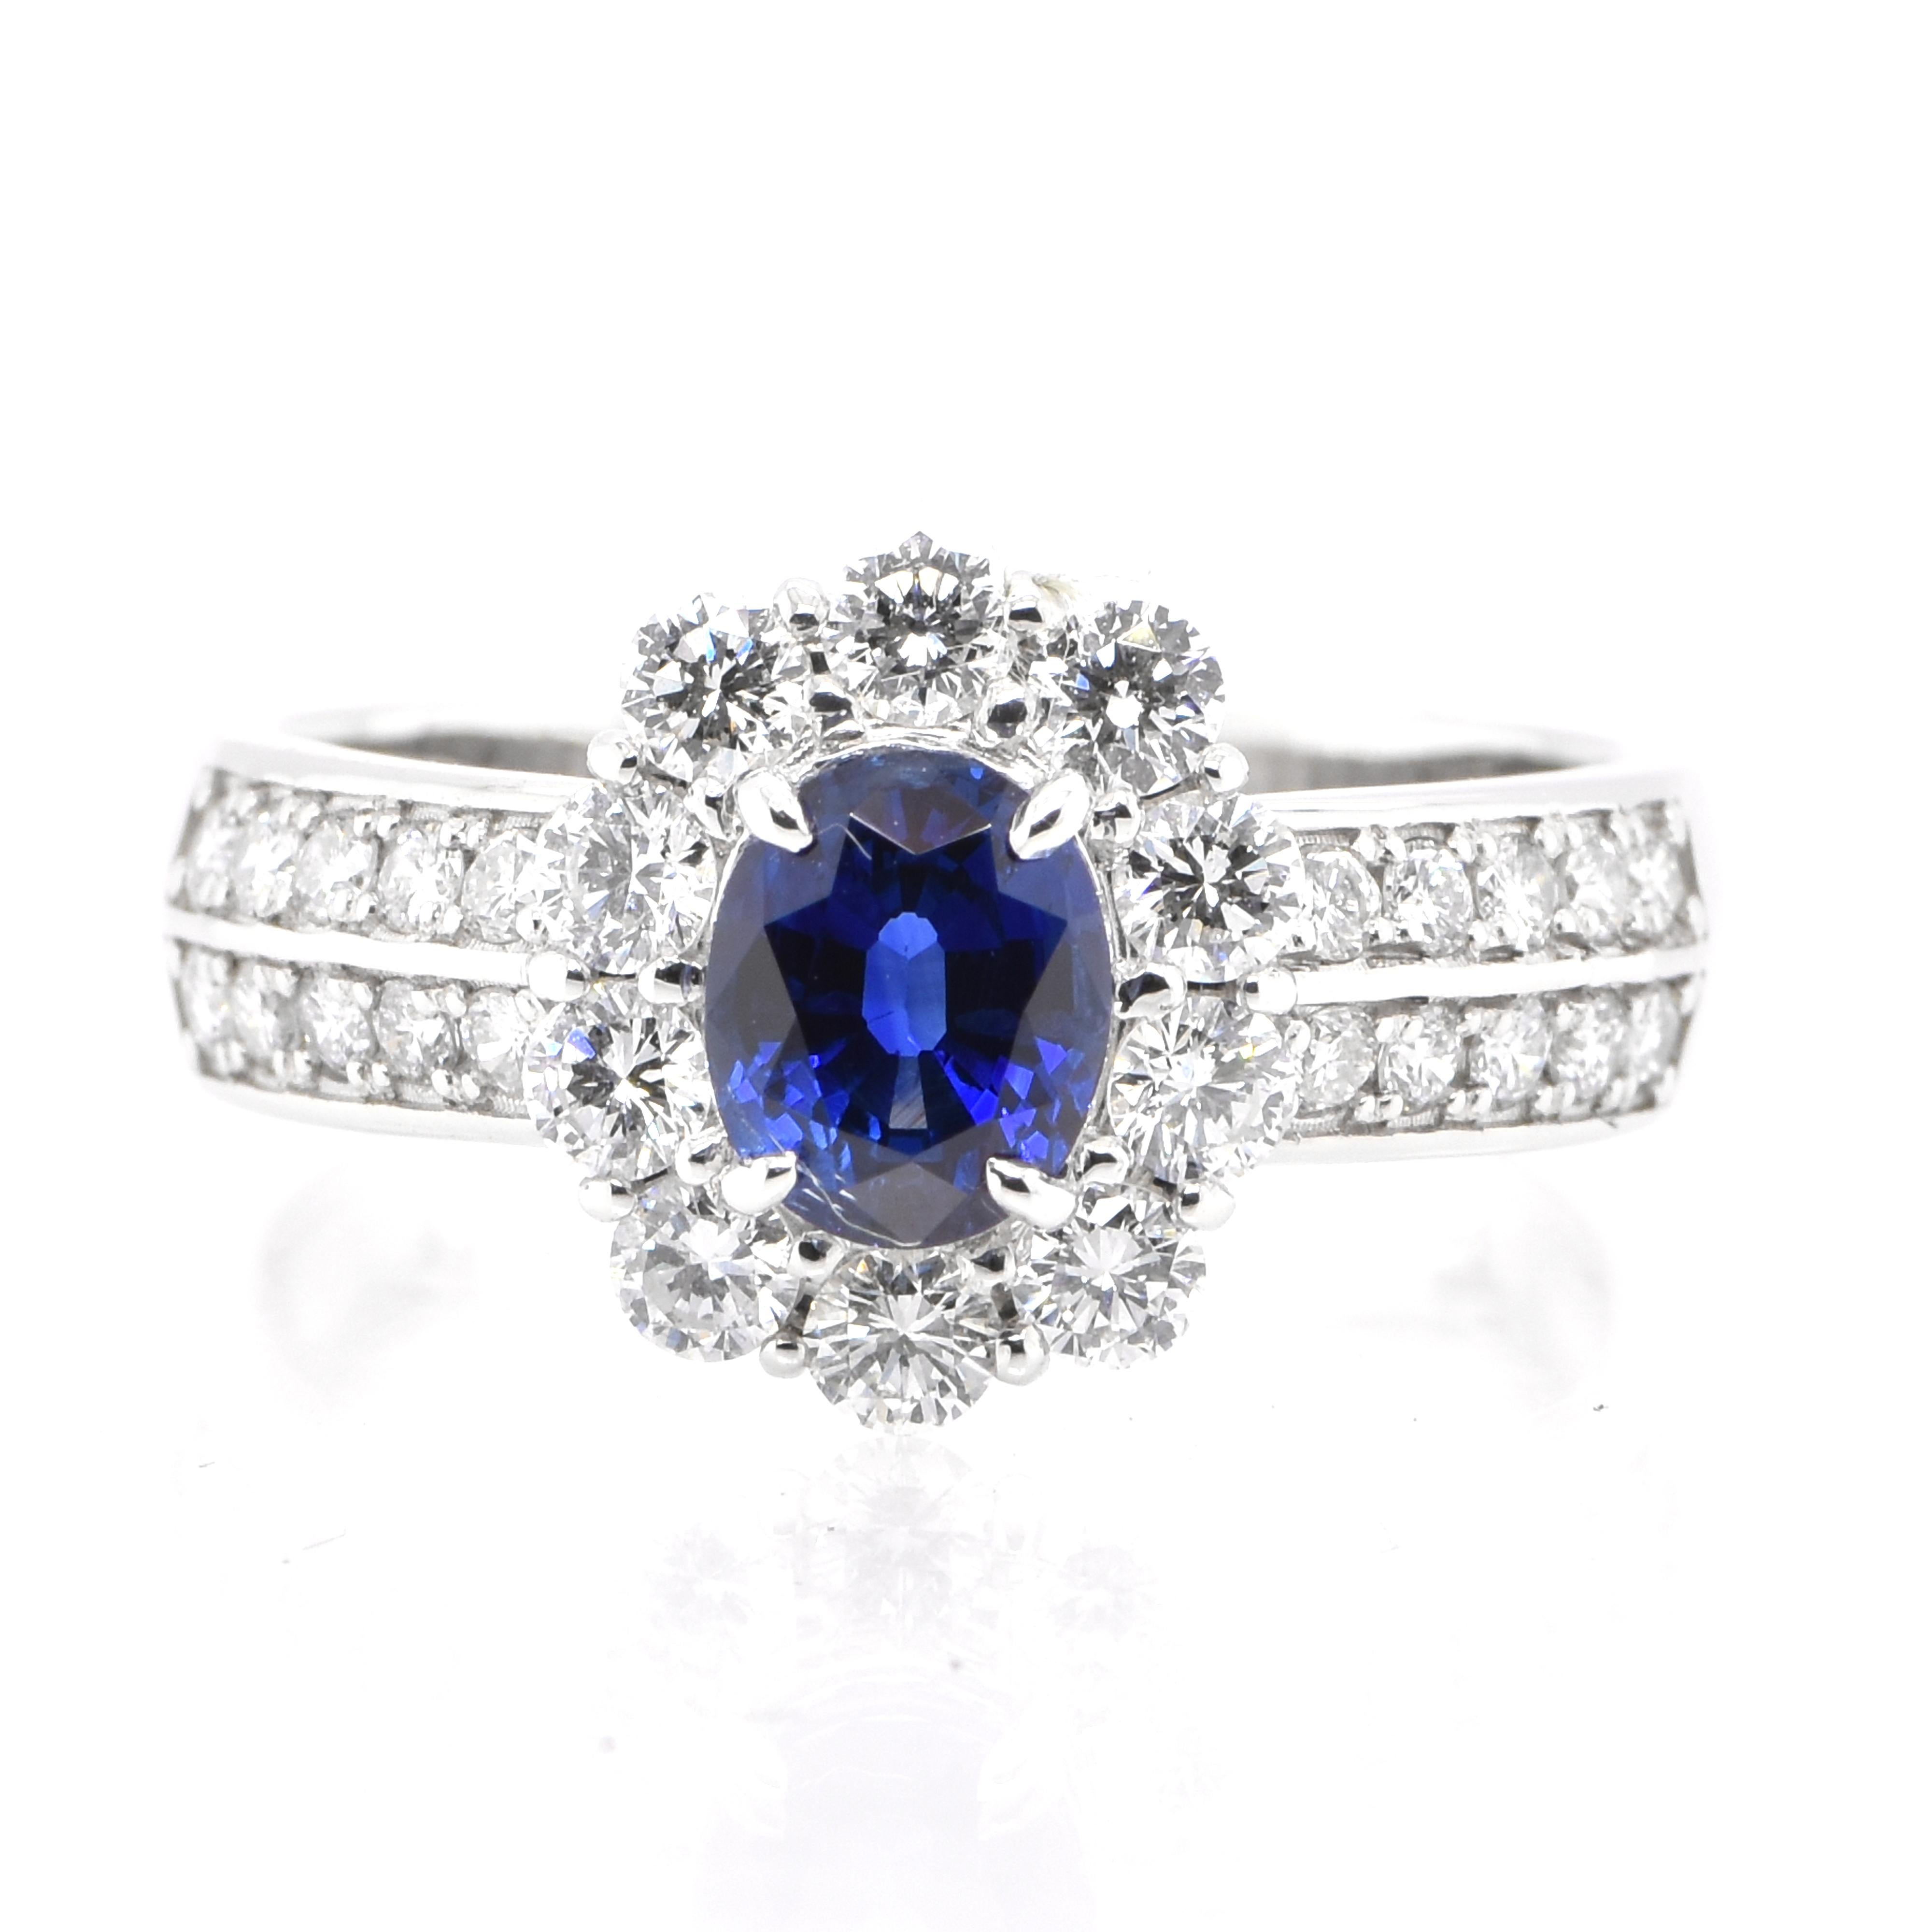 A beautiful ring featuring 1.26 Carat, Natural Sapphire and 0.74 carats Diamond Accents set in Platinum. Sapphires have extraordinary durability - they excel in hardness as well as toughness and durability making them very popular in jewelry.